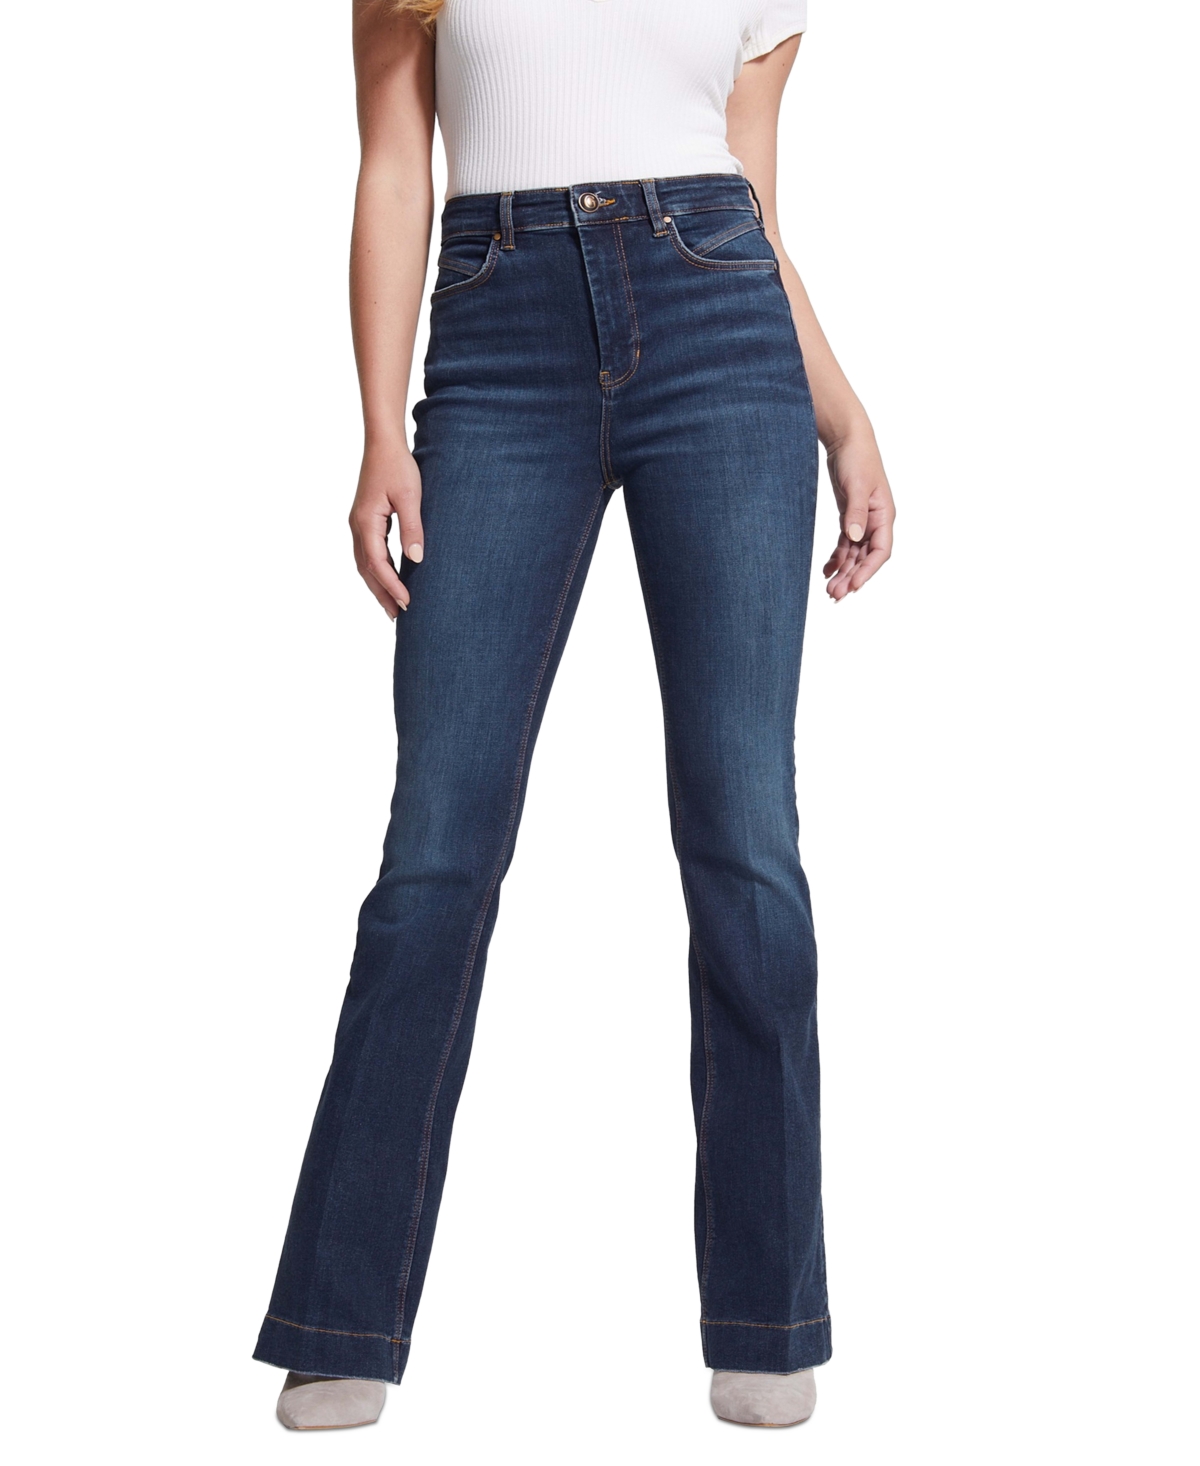 GUESS WOMEN'S POP '70S HIGH-RISE FLARE JEANS